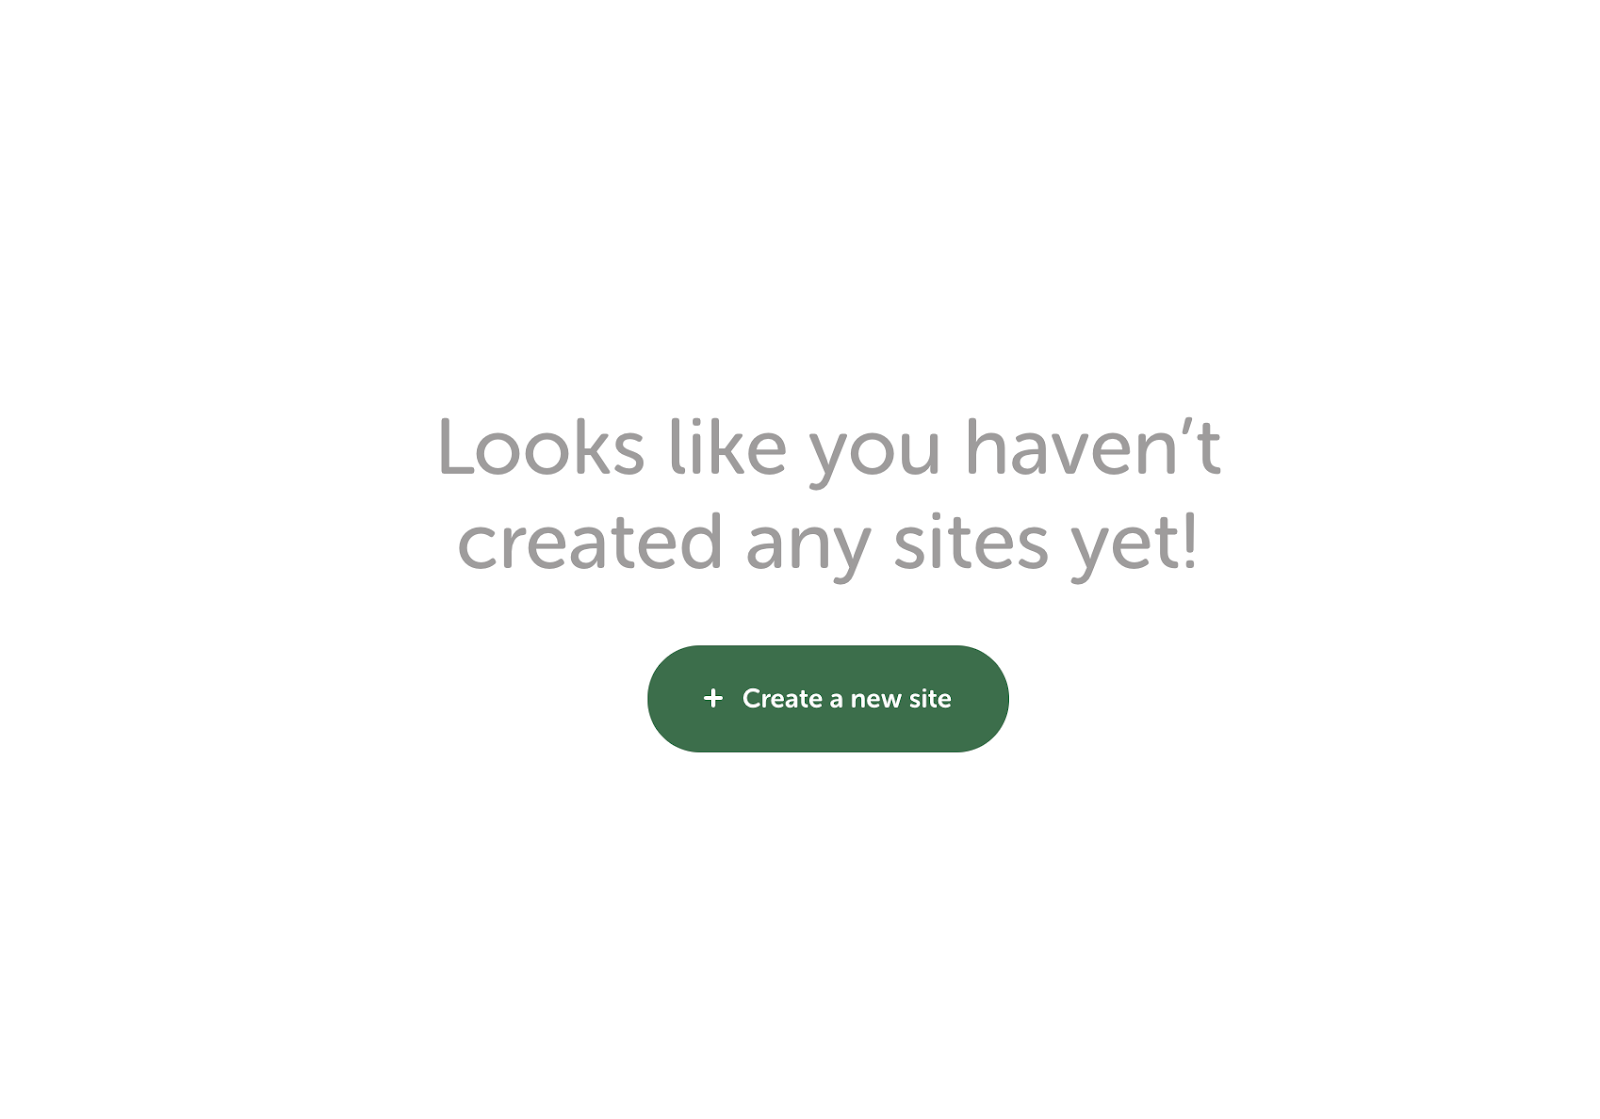 Creating a new site with Local. 